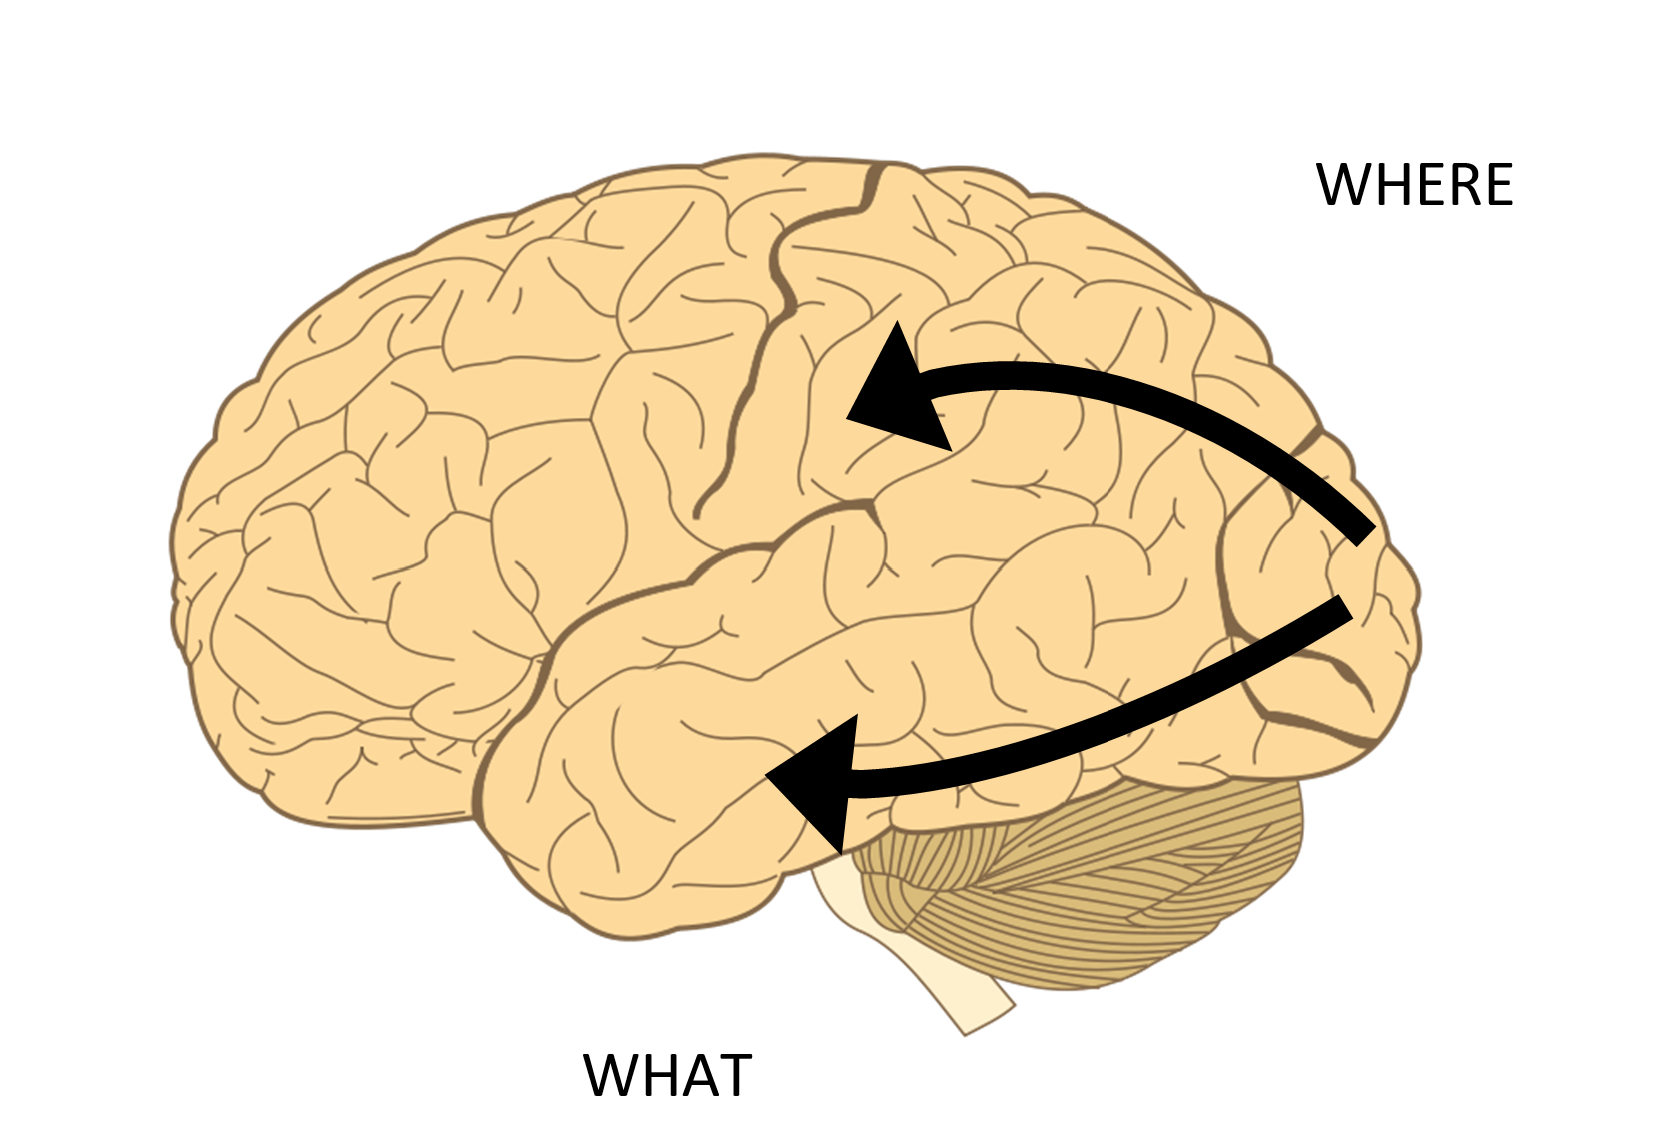 Picture of the brain with an arrow labeled WHERE going from the occipital cortex to the parietal cortex (upper part of the brain) and an arrow labeled WHAT going from the occipital cortex down to the temporal cortex